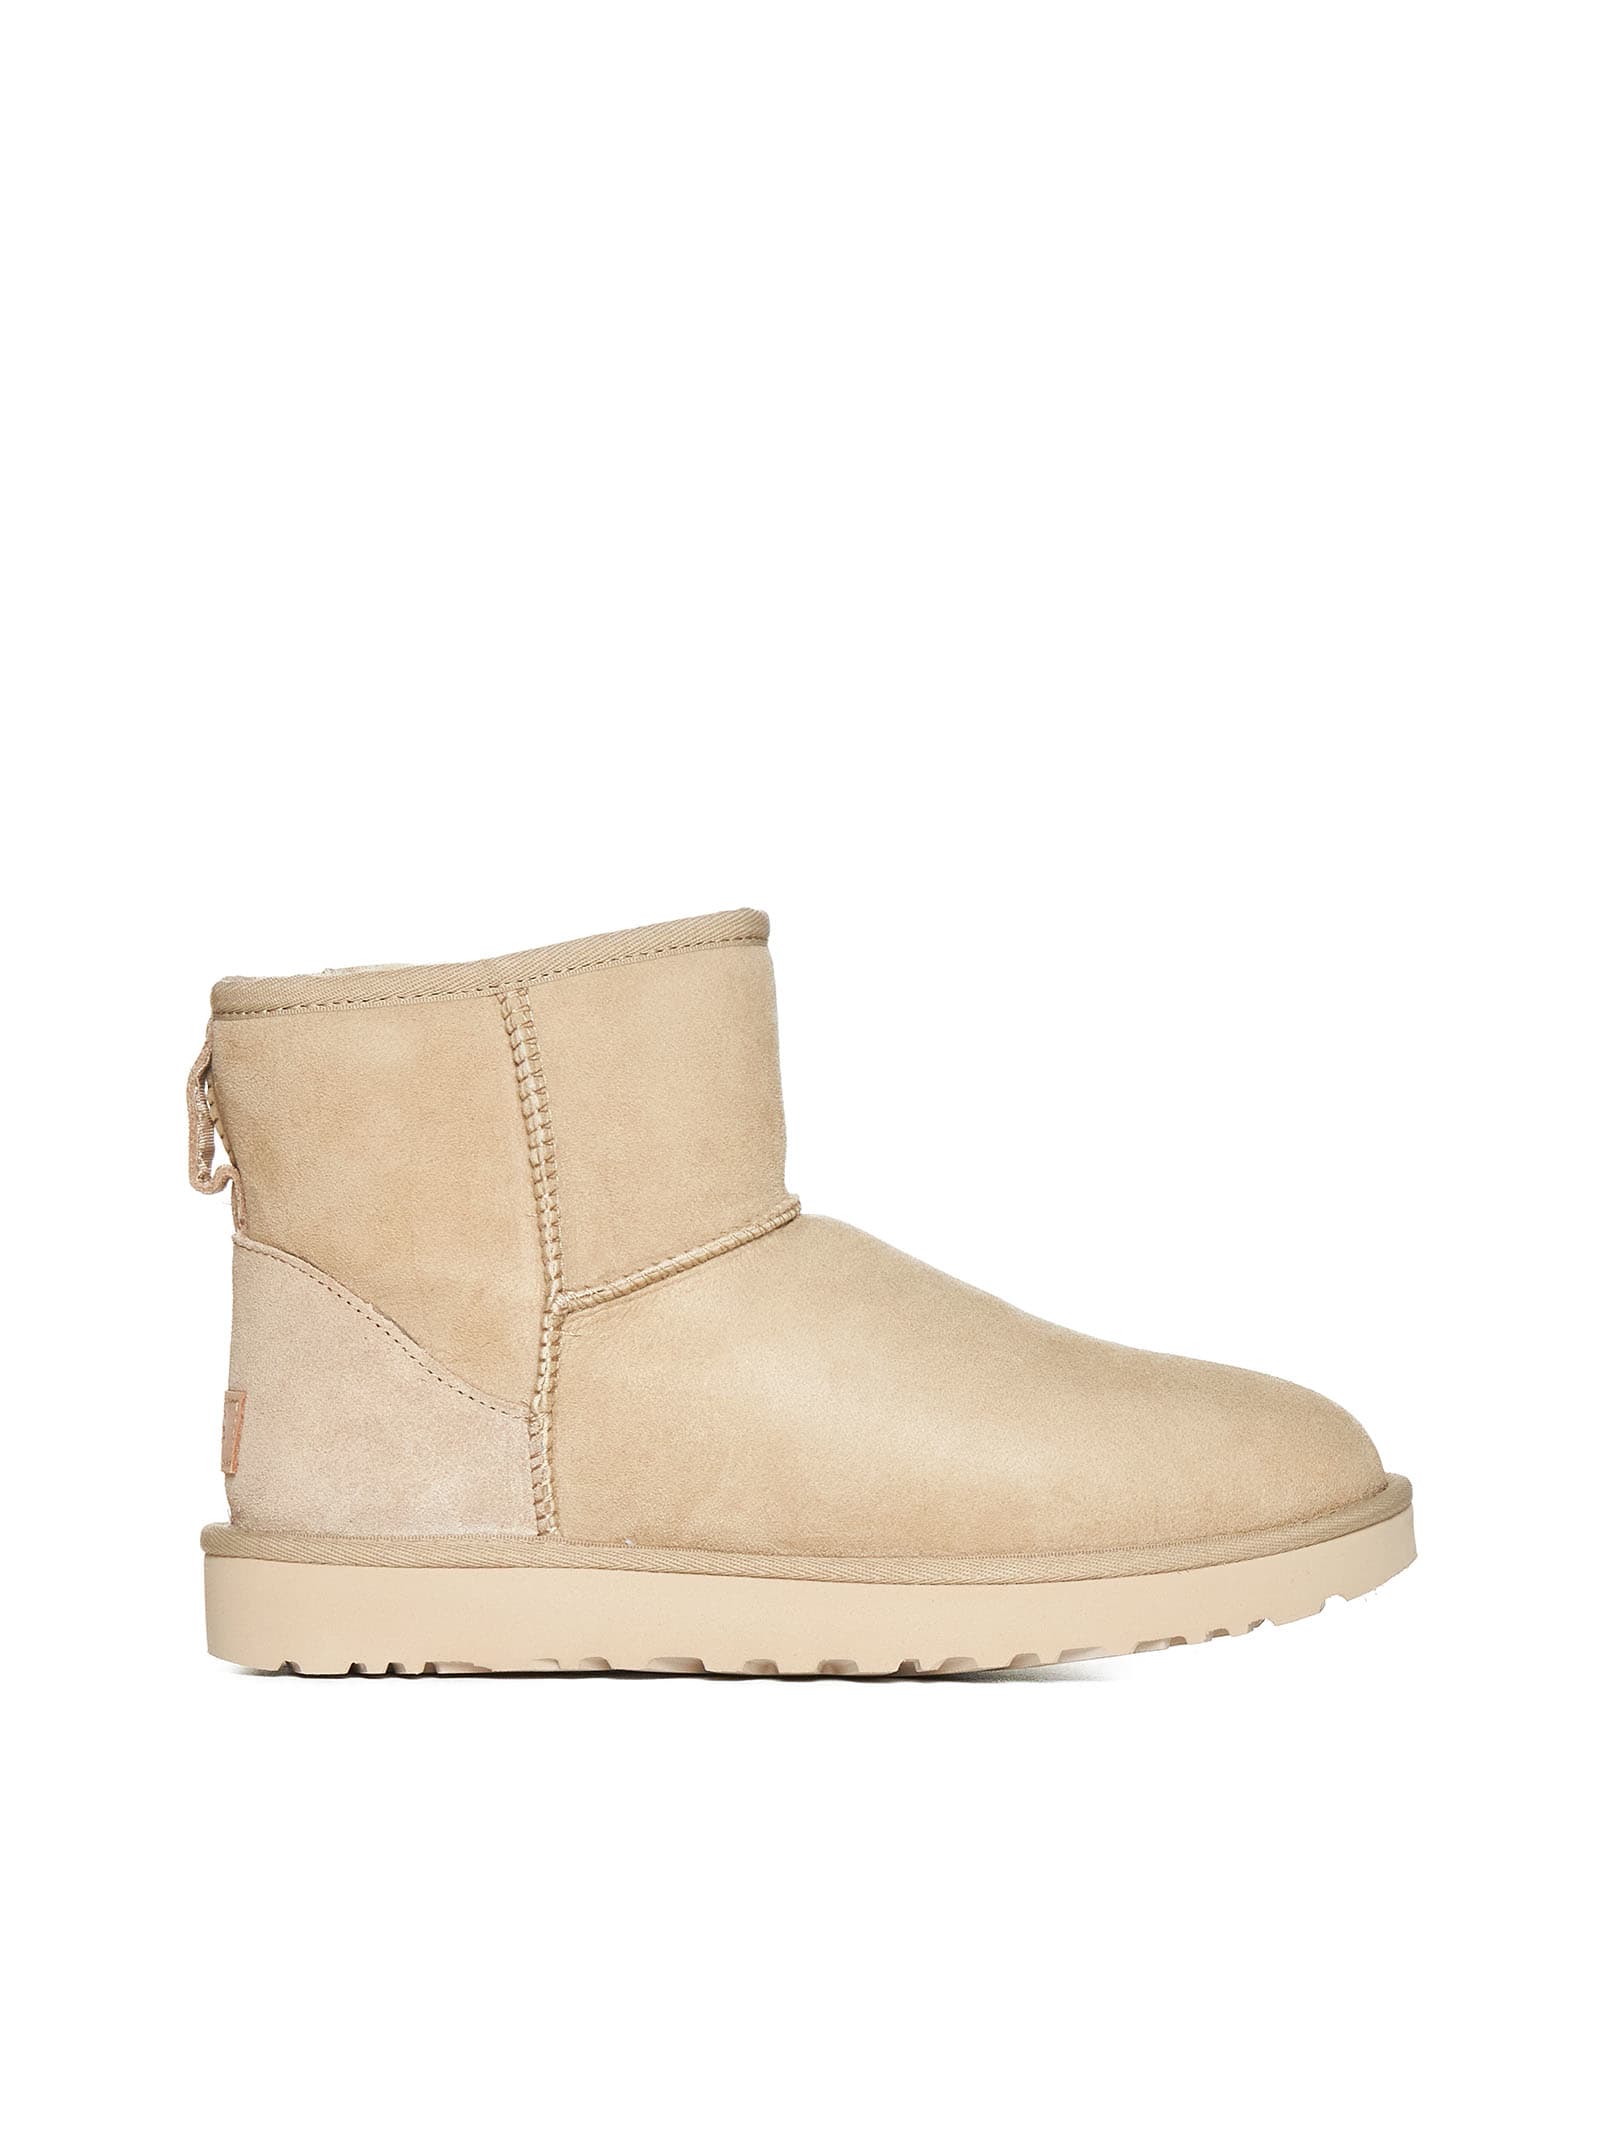 Shop Ugg Boots In Mustard Seed